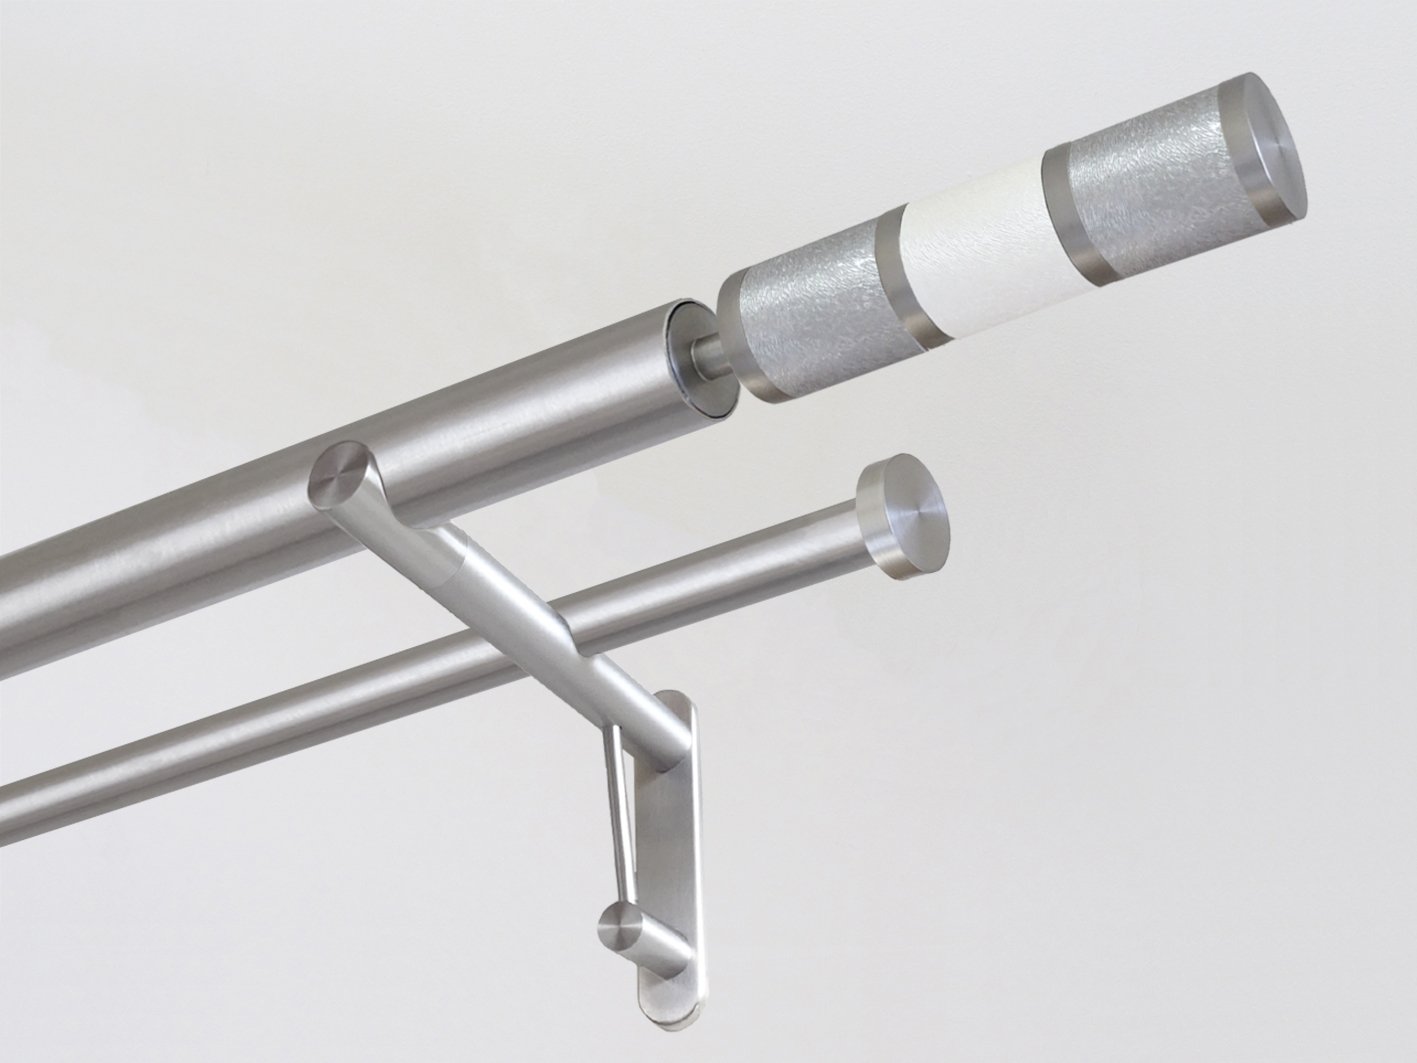 30mm diameter stainless steel double curtain pole system with Combination finials in "Winter"